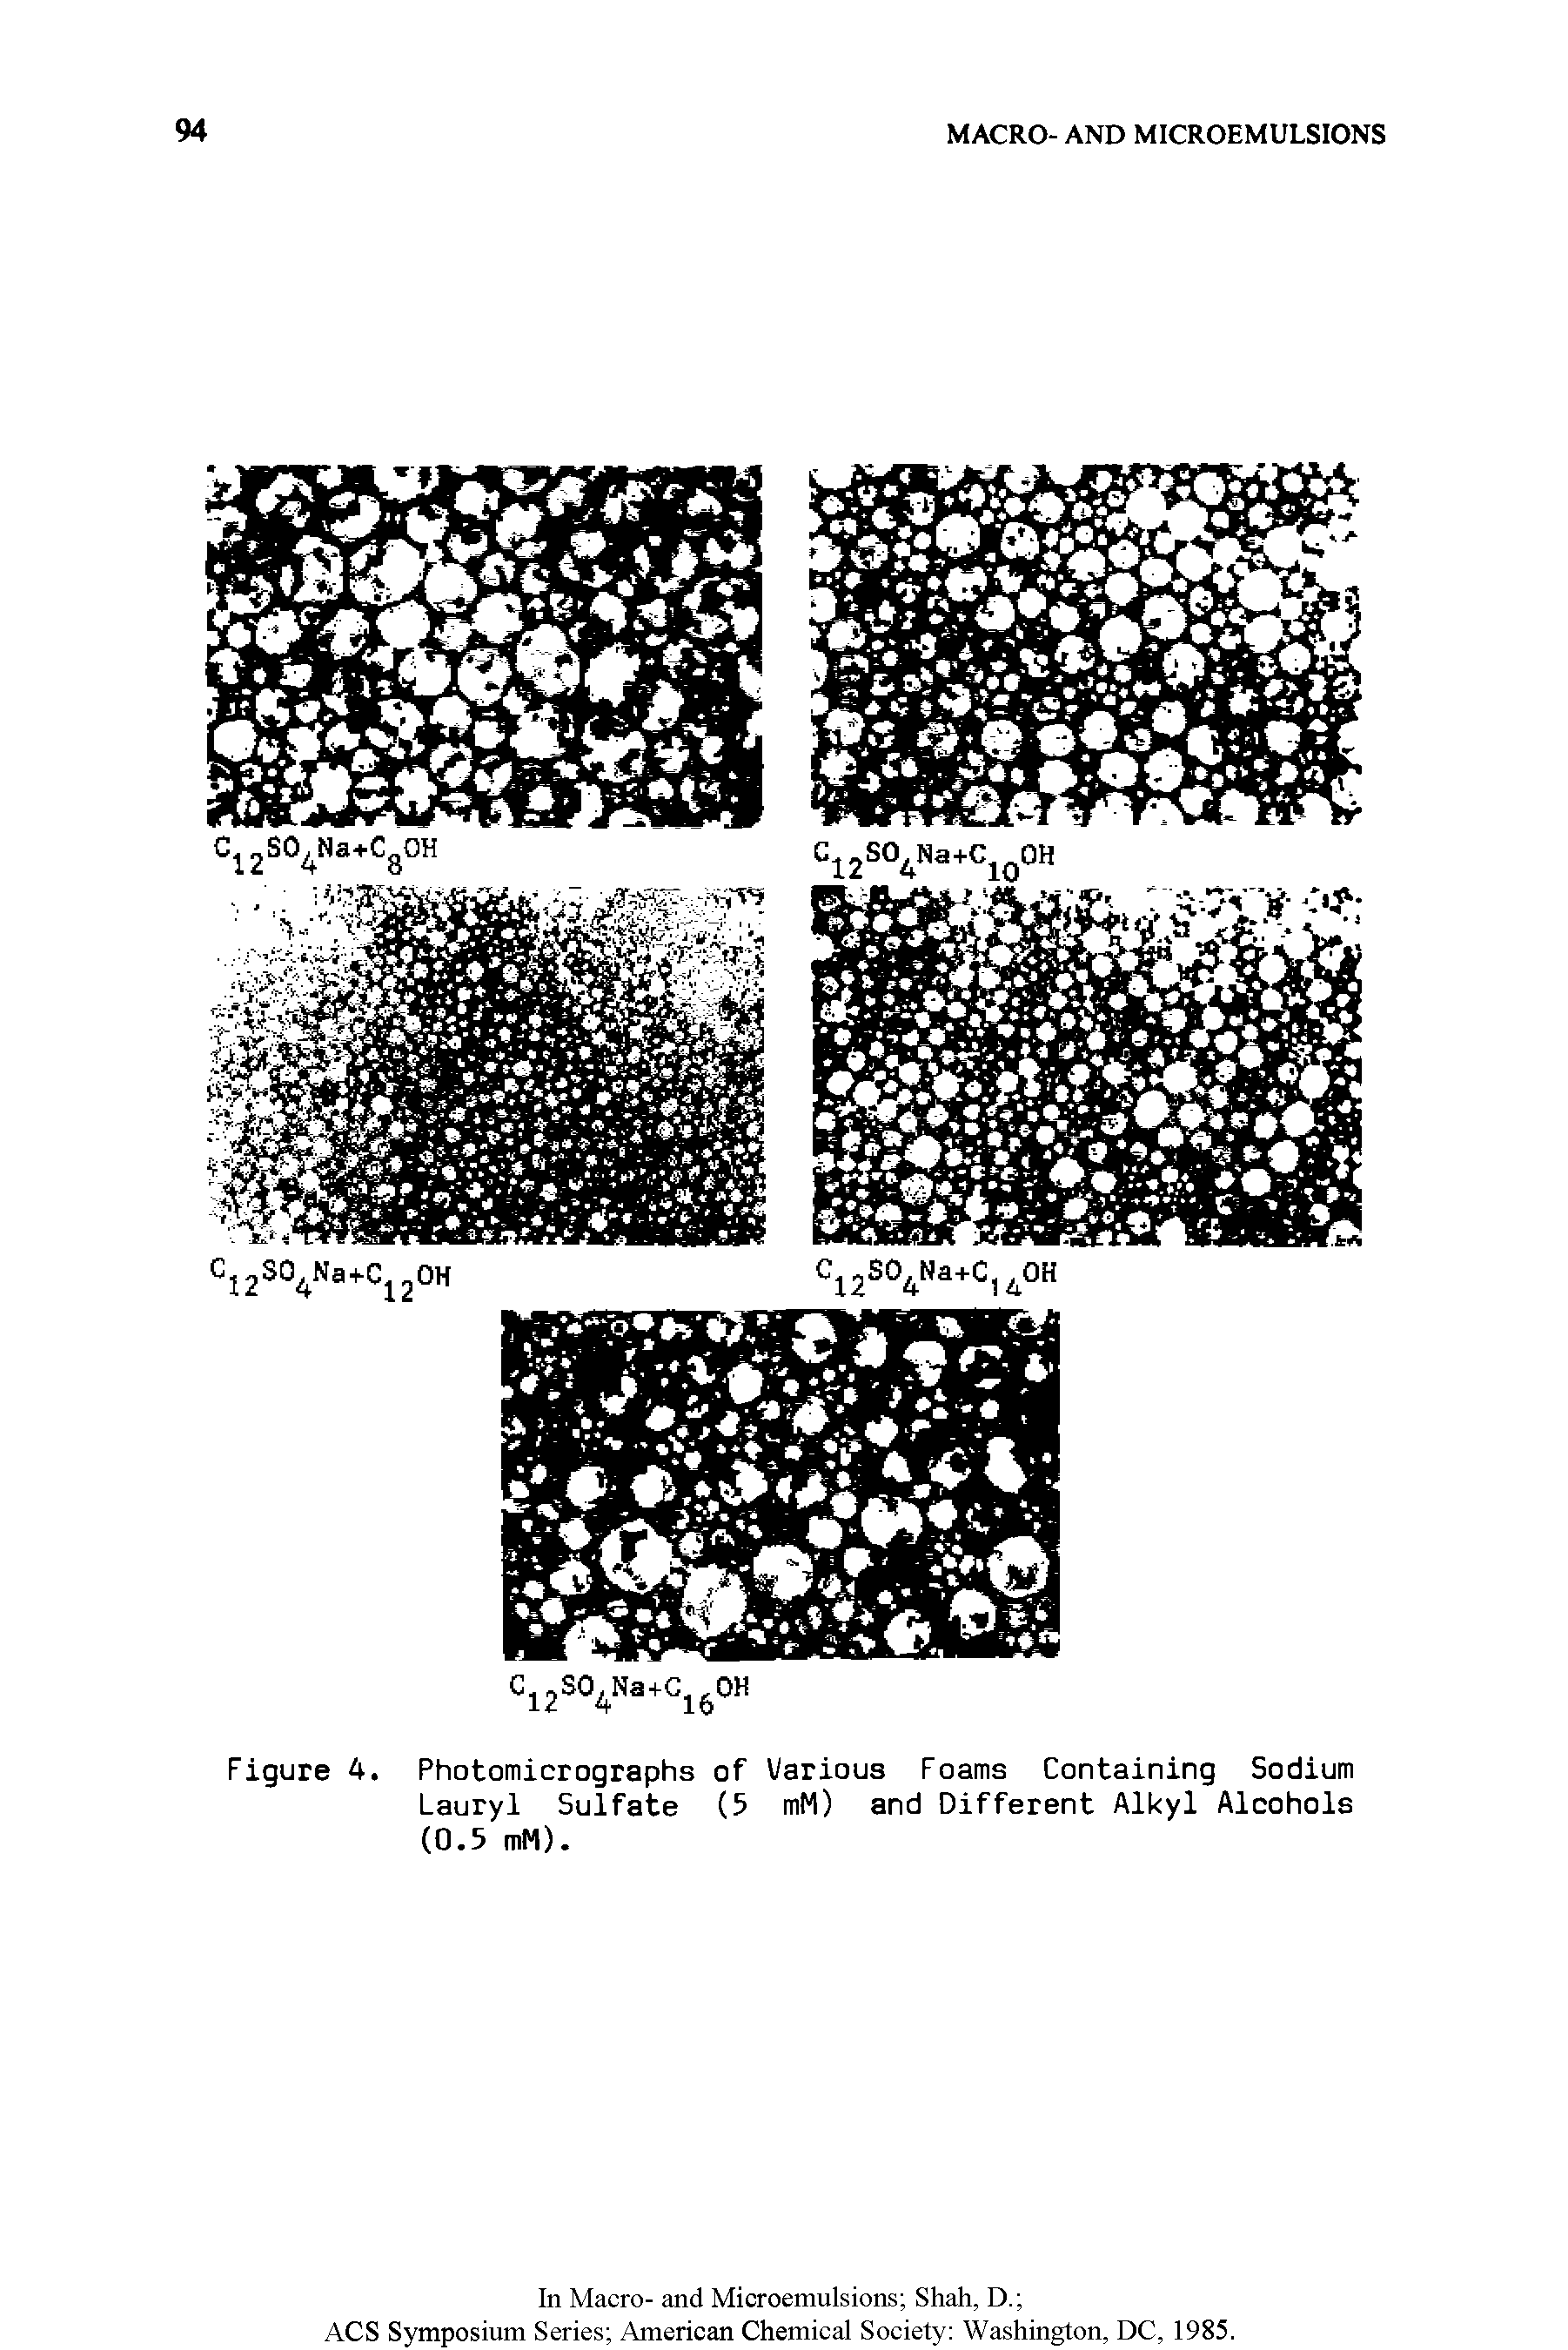 Figure 4. Photomicrographs of Various Foams Containing Sodium Lauryl Sulfate (5 mM) and Different Alkyl Alcohols (0.5 mM).